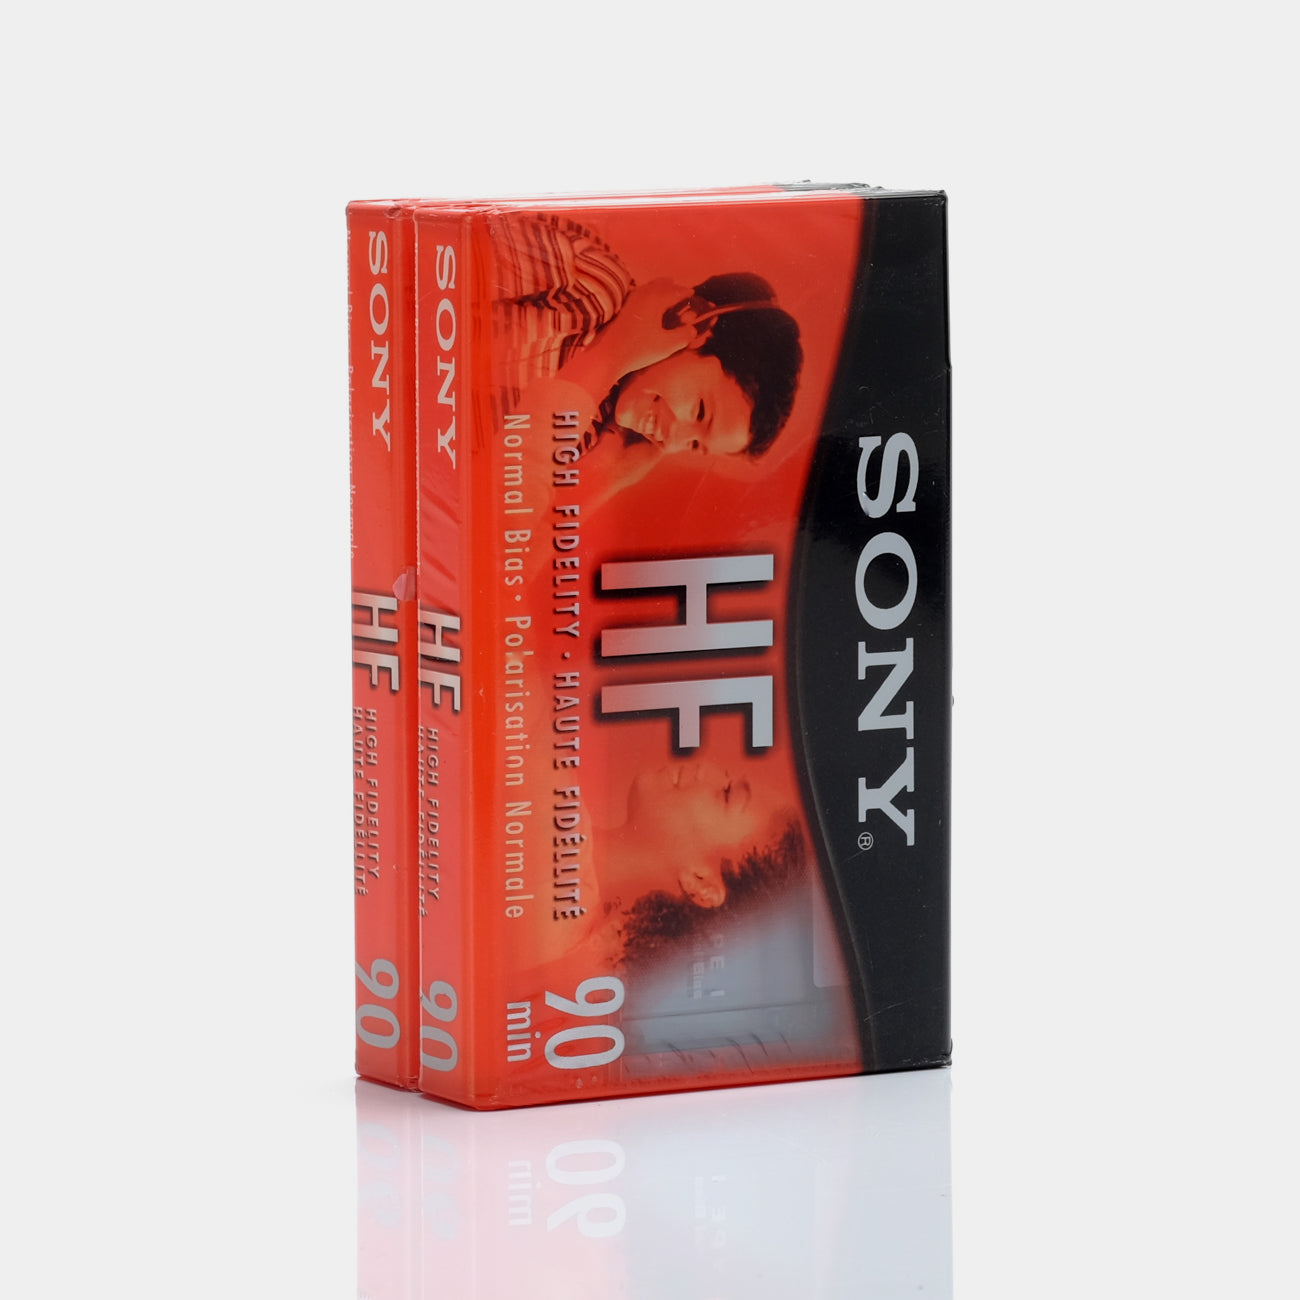 Sony HF90 Type I Blank Recordable Cassette Tapes (2 Pack)